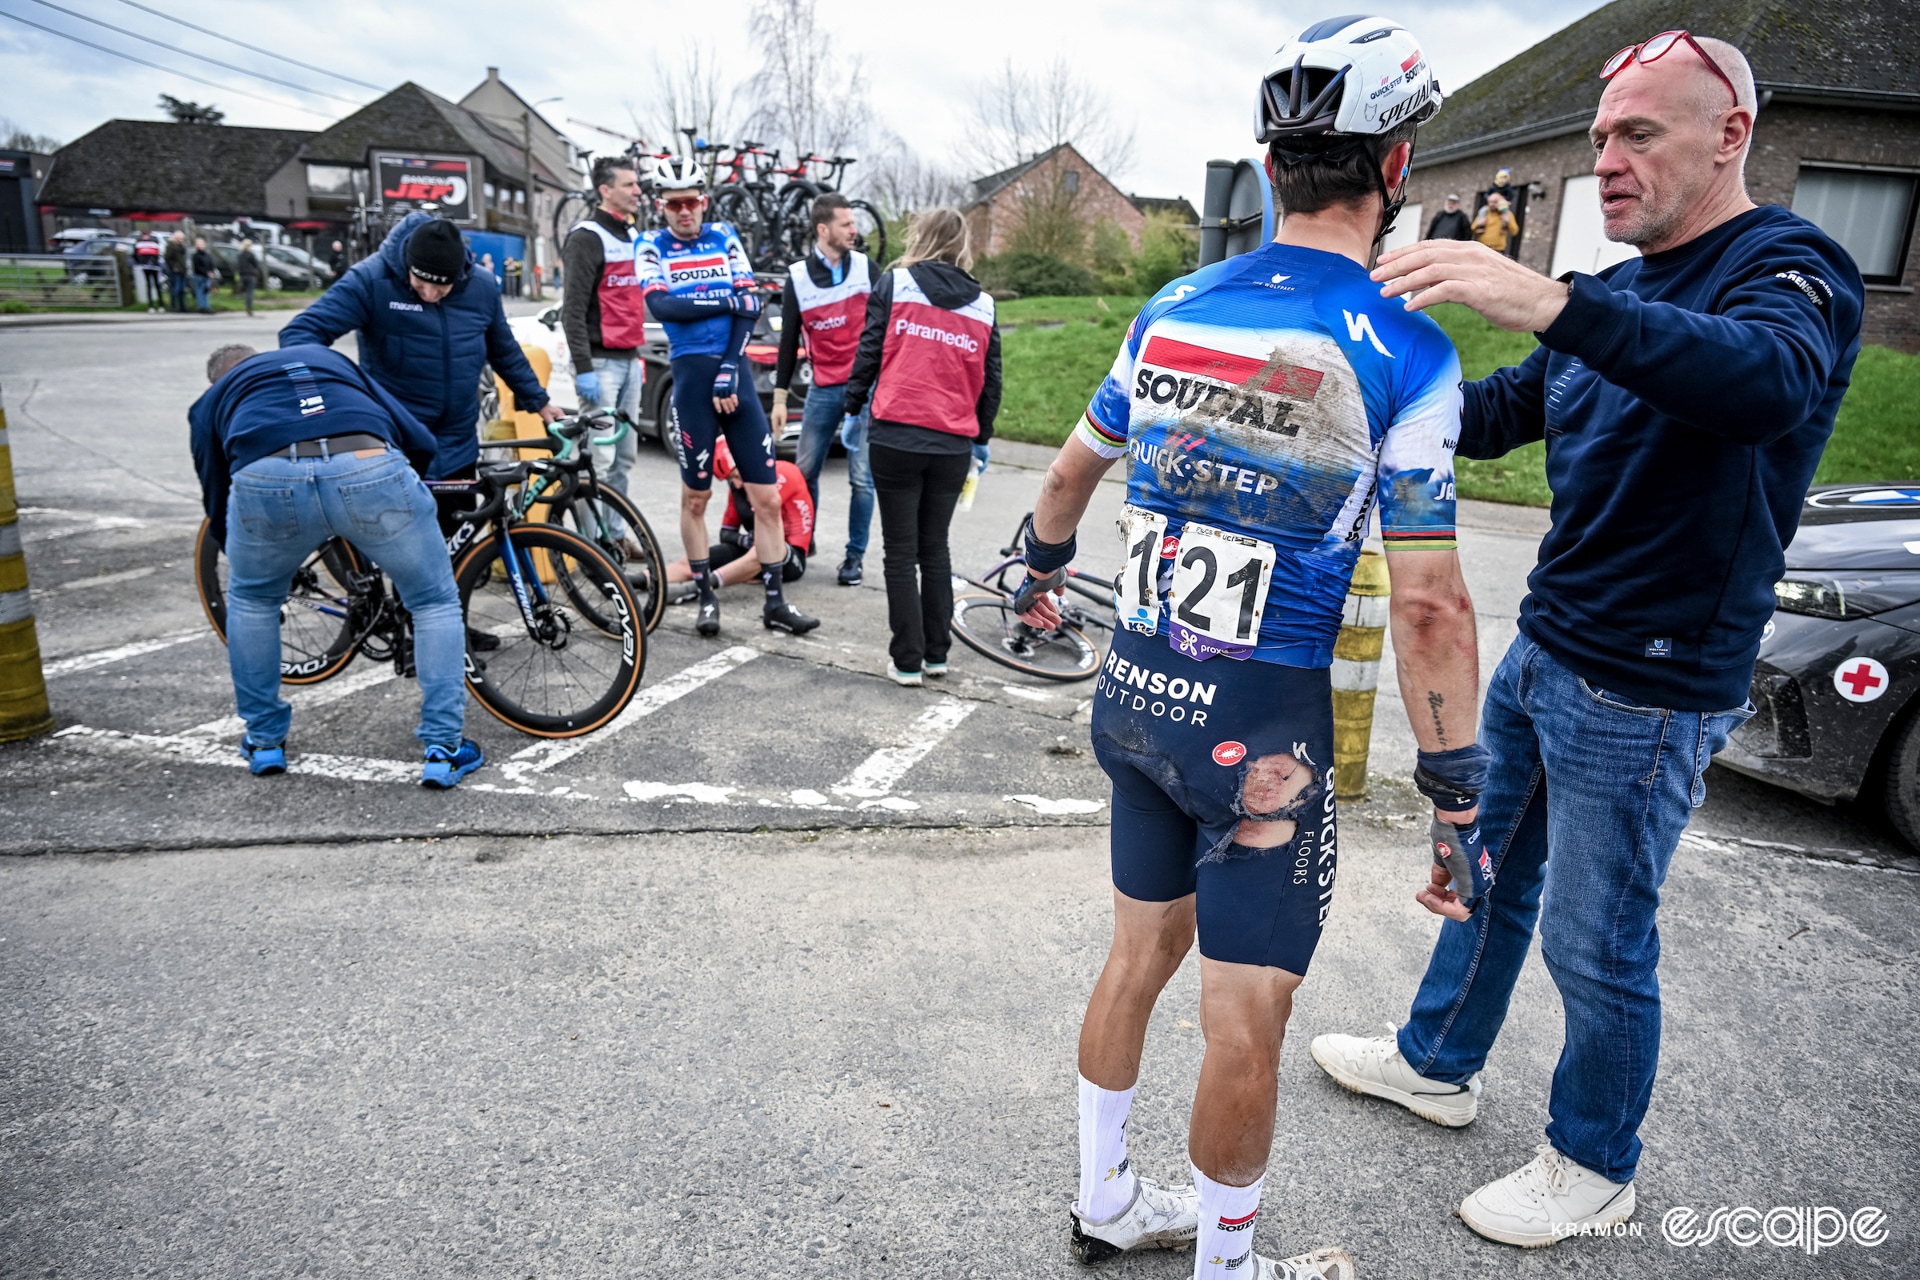 Alaphilippe and Asgreen look battered after a crash